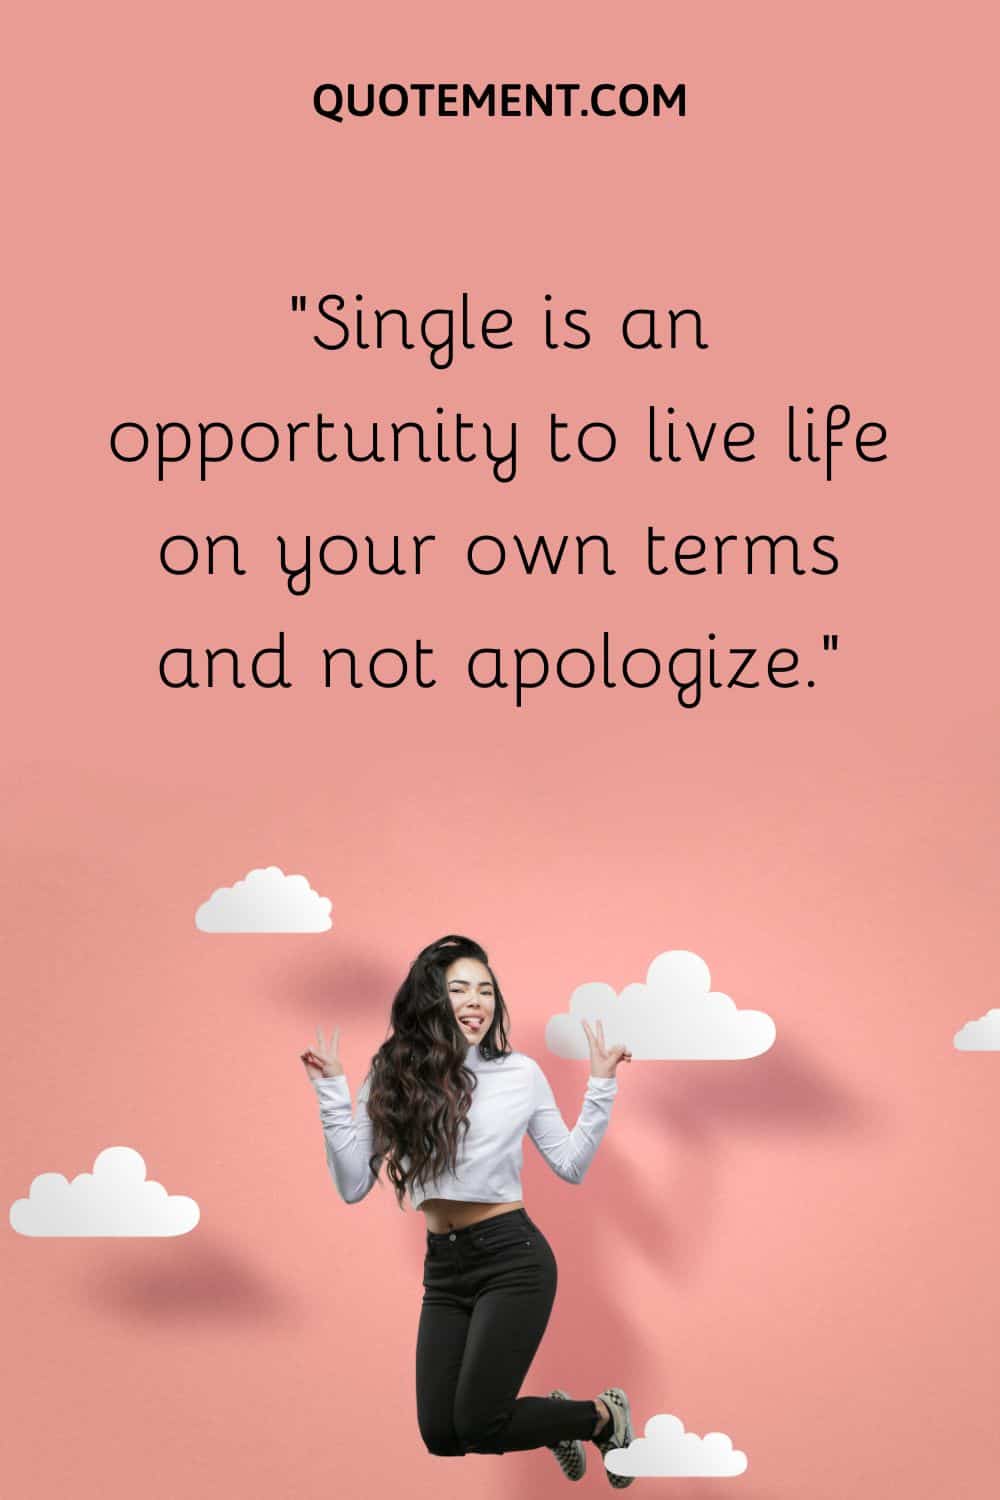 Single is an opportunity to live life on your own terms and not apologize